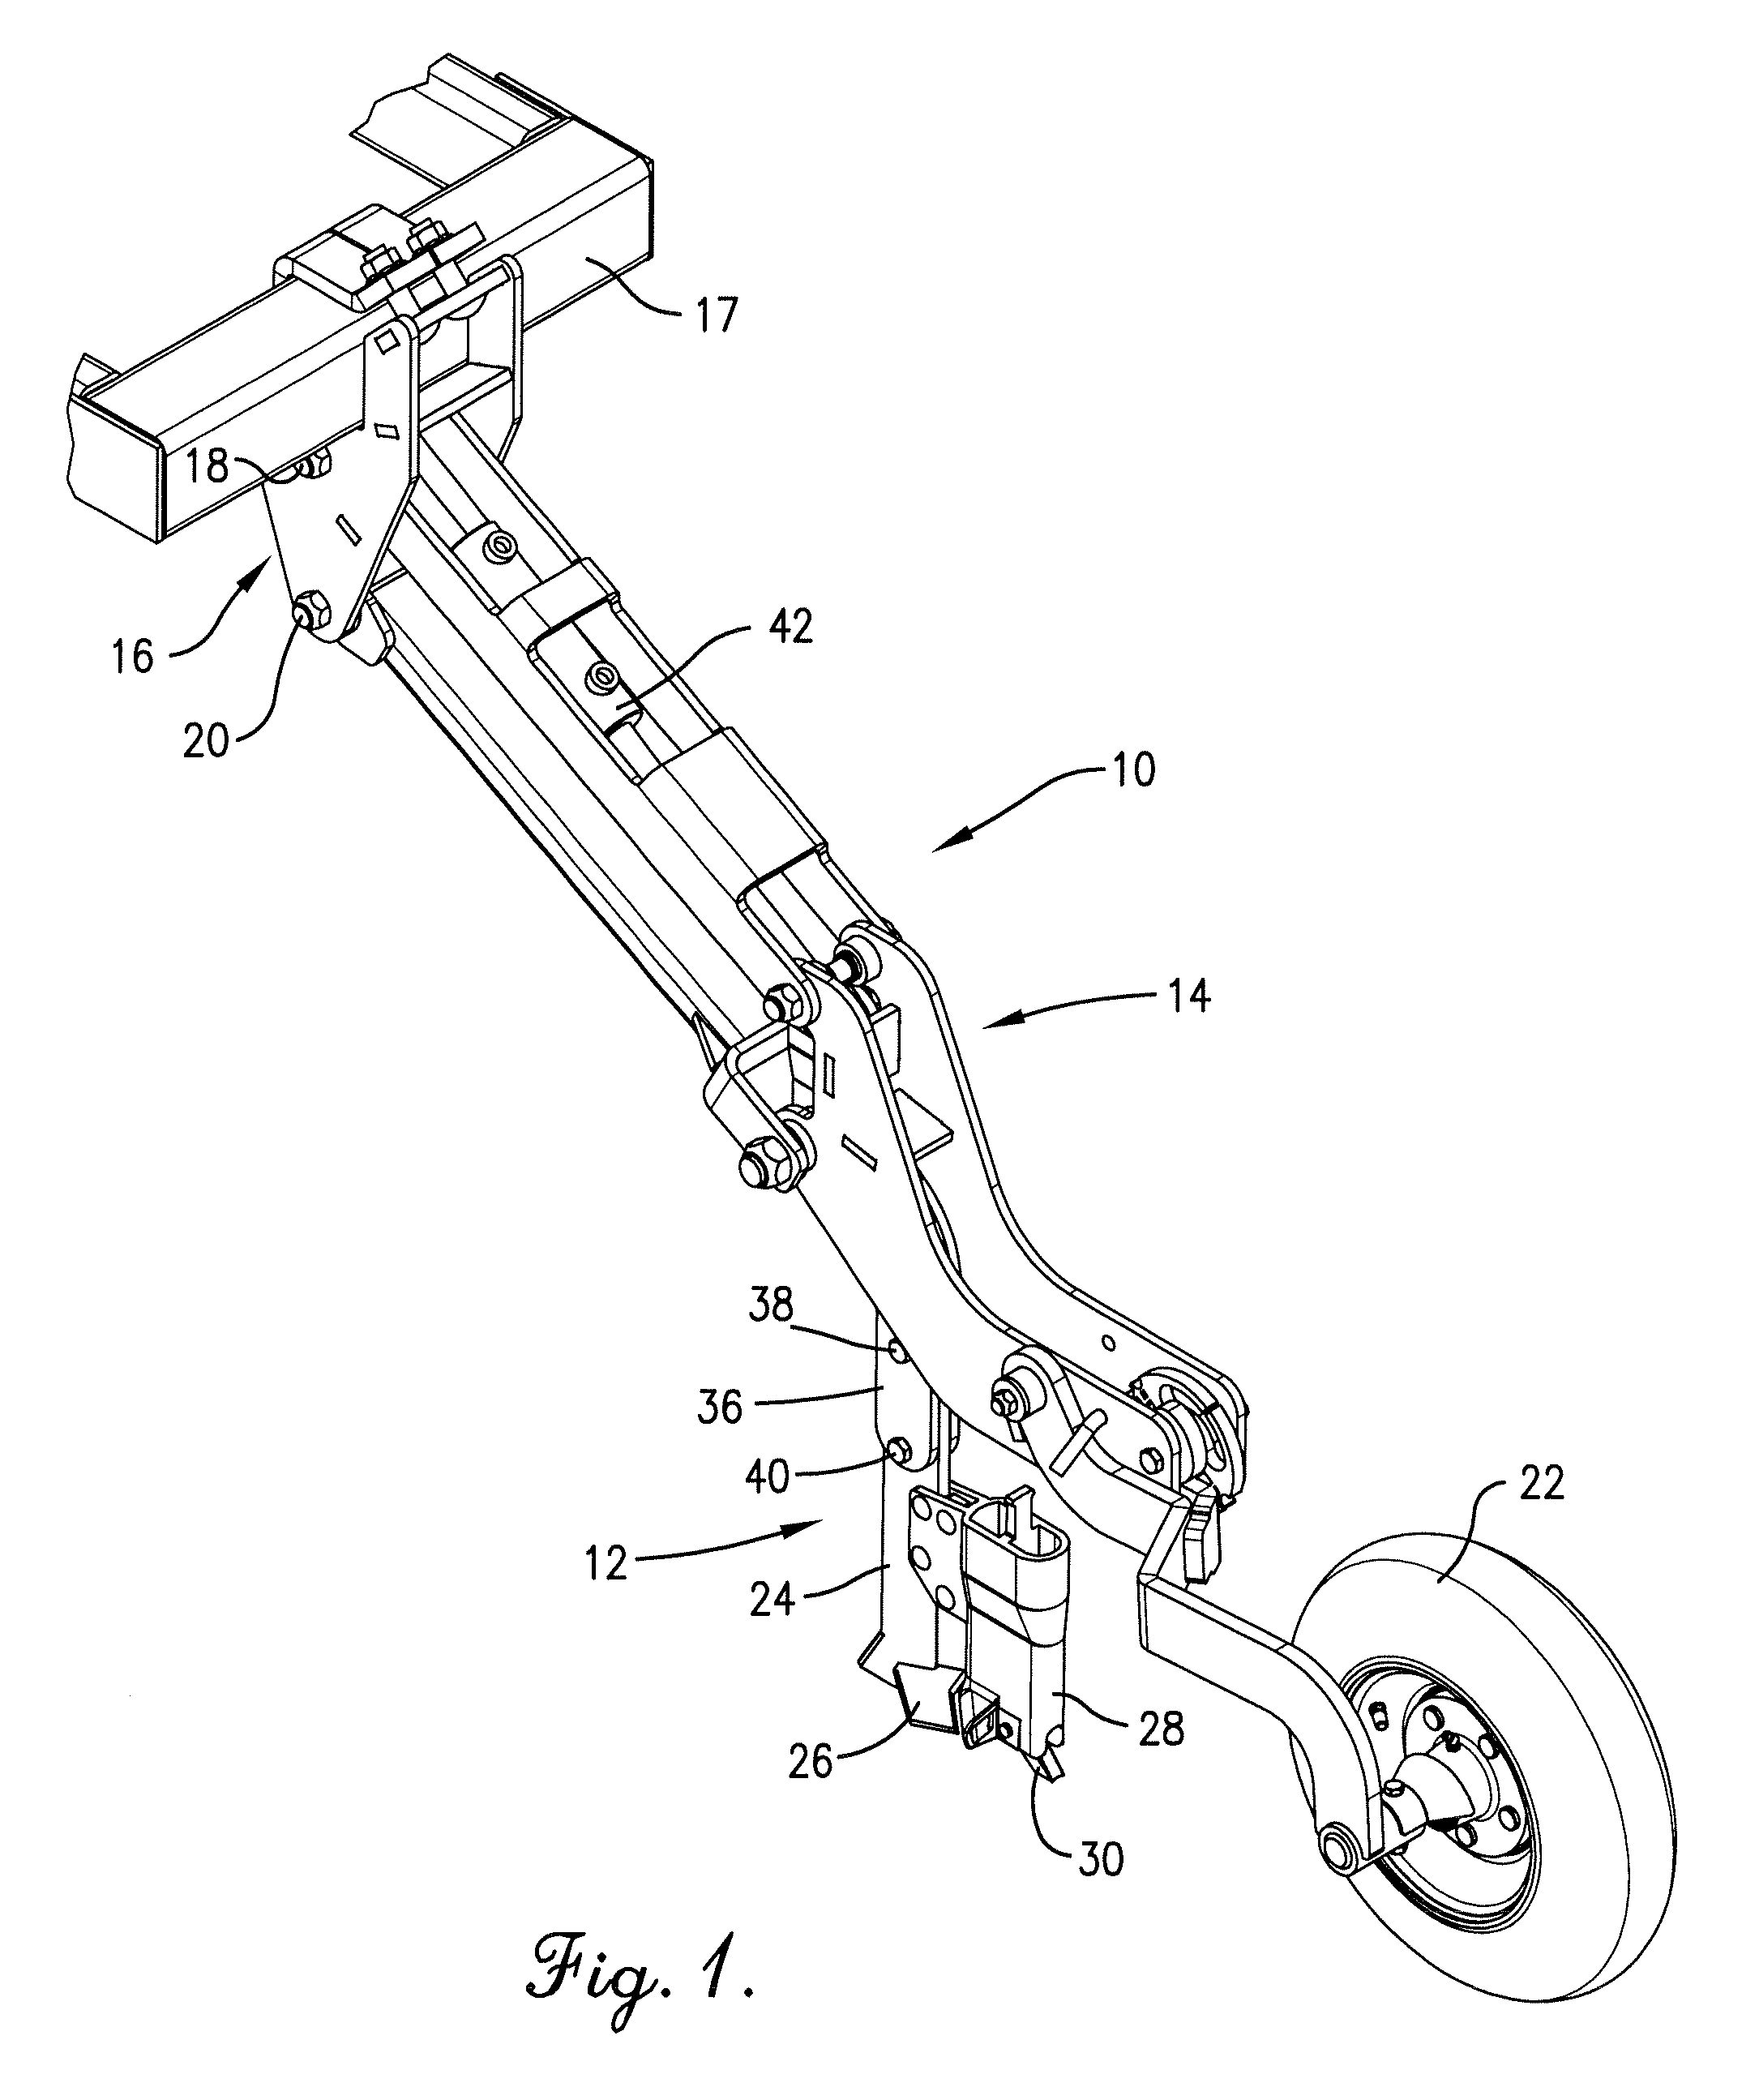 Seed and fertilizer placement apparatus having double shoot seed boot